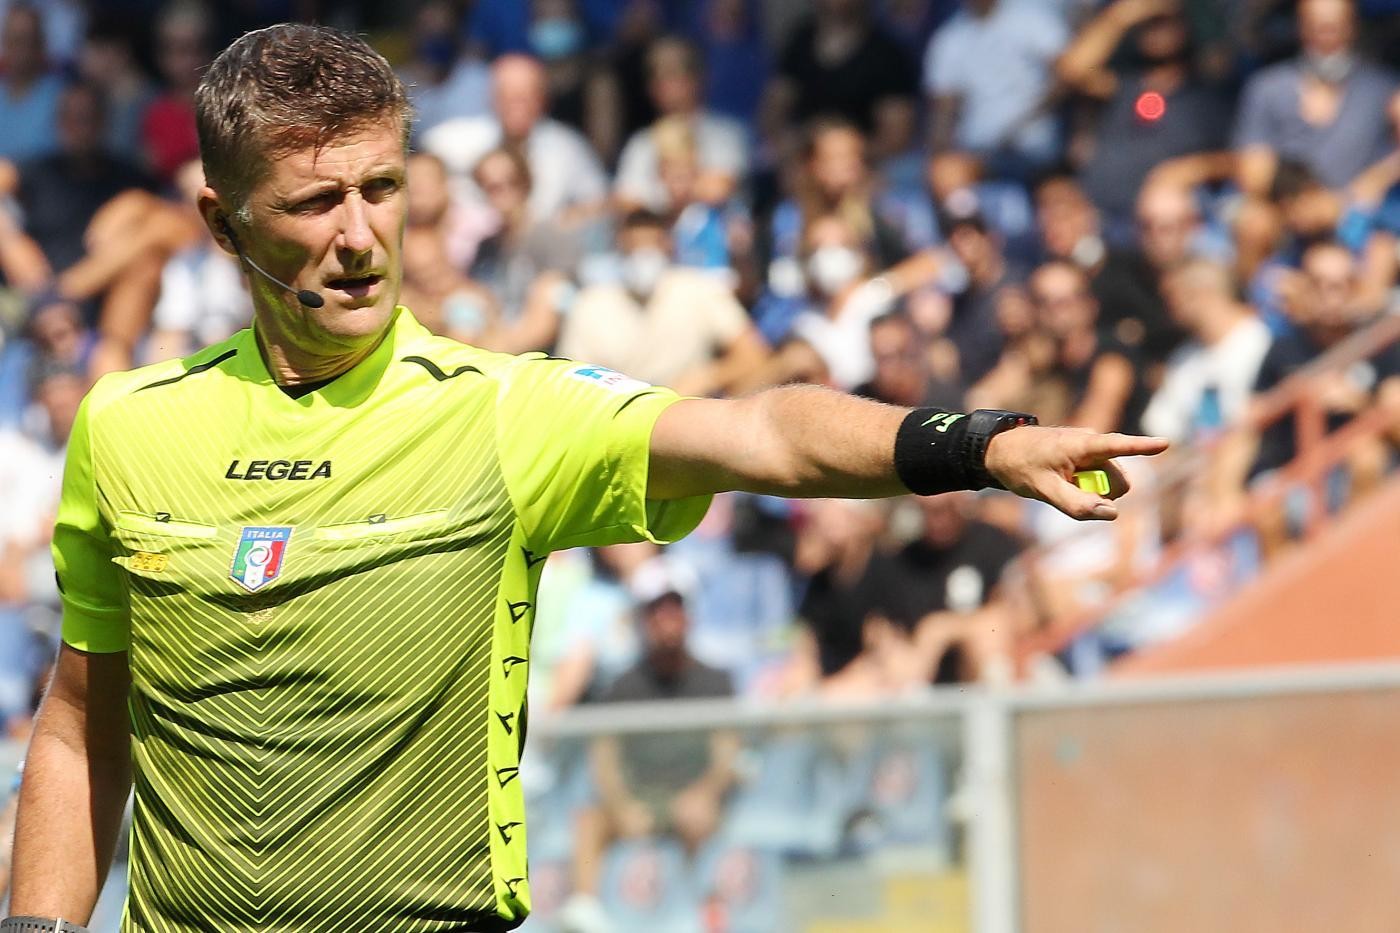 SERIE A TIM, THE REFEREES FOR THE 8TH ROUND